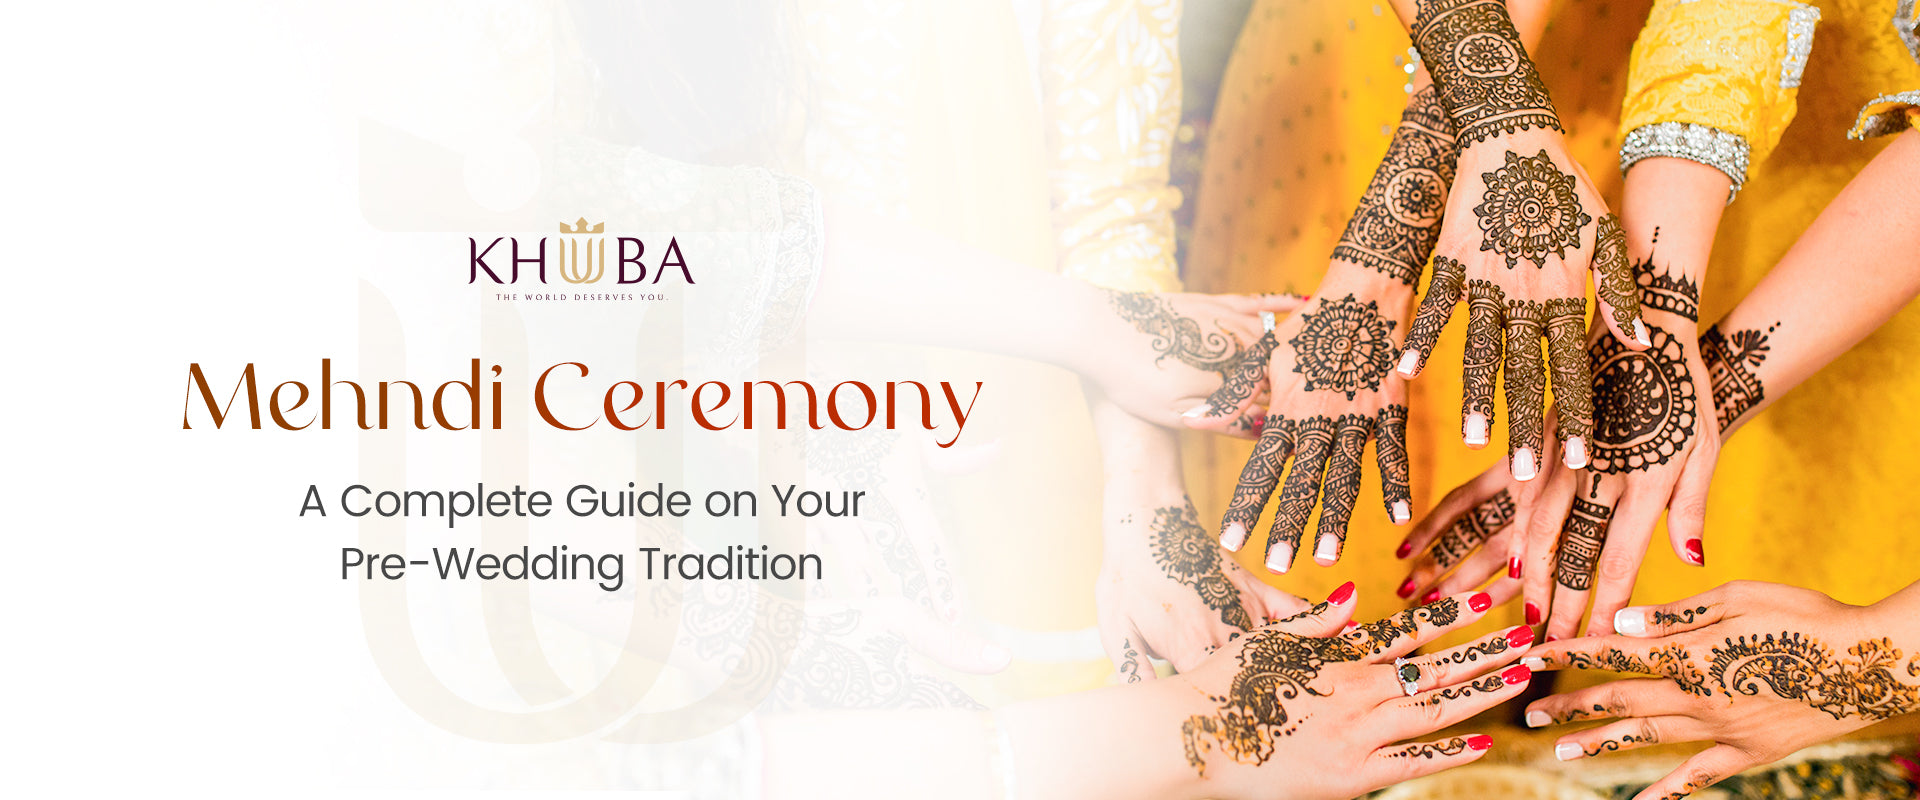 Mehndi Ceremony: A Complete Guide on Your Pre-Wedding Tradition